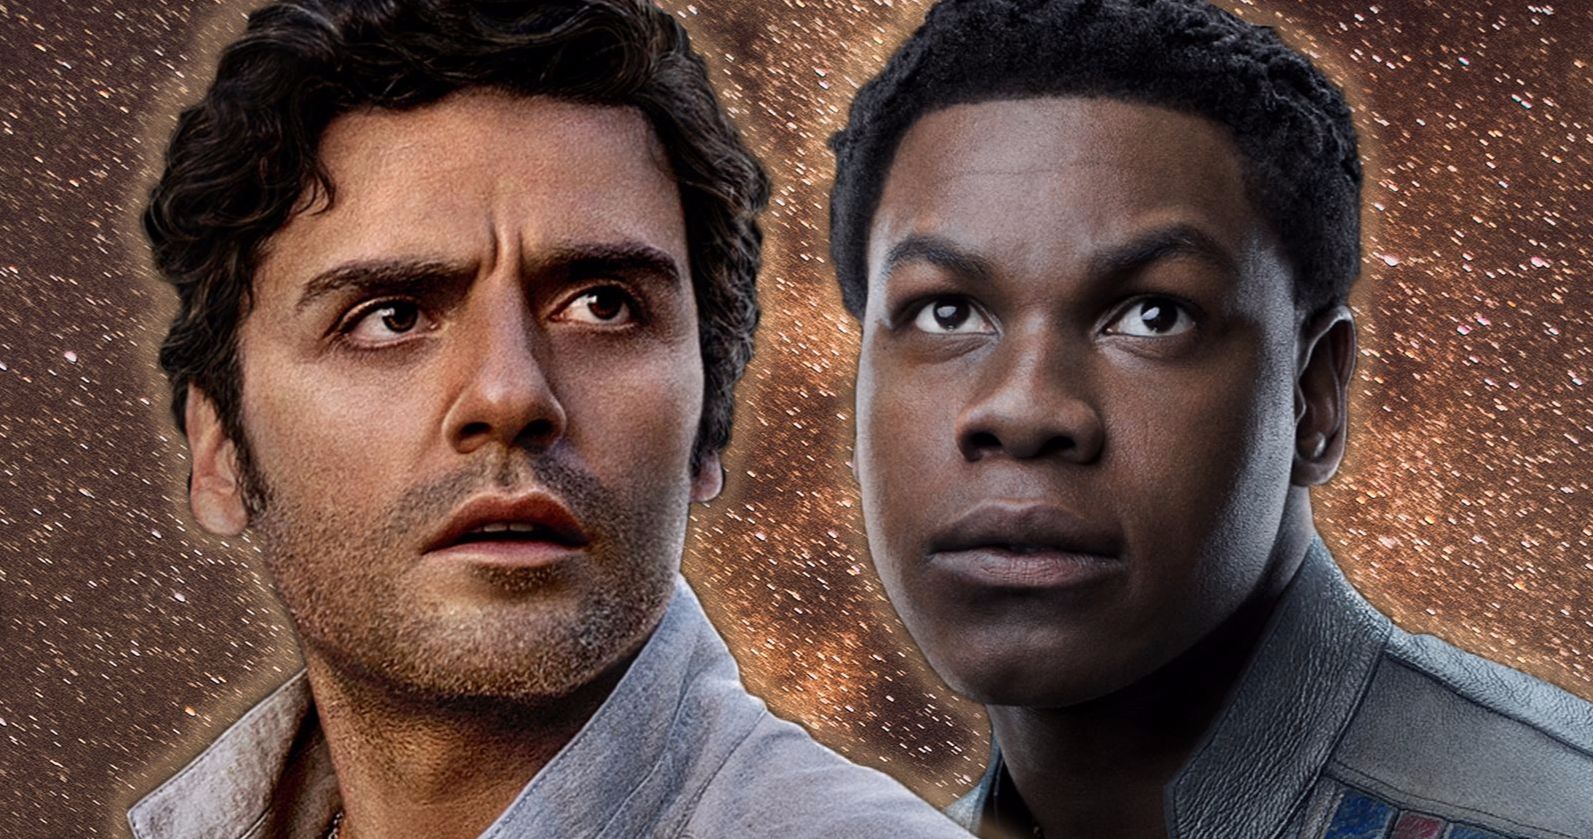 Star Wars Duo Drops a Mysterious Tease, Are Poe and Finn Taking It to the Next Level?